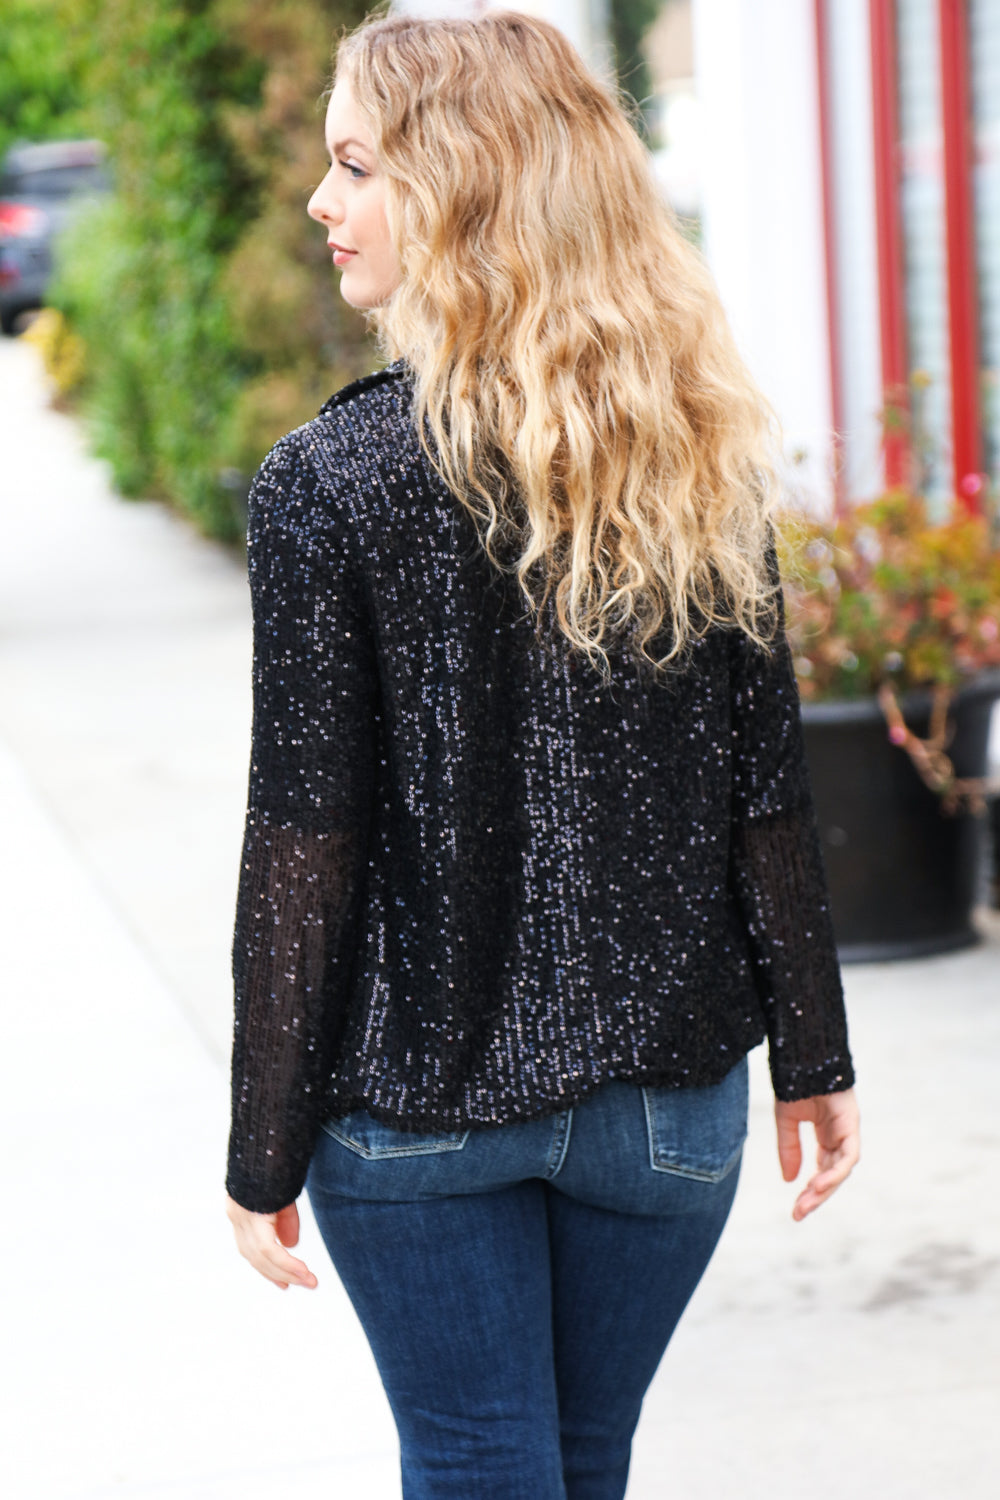 Be Your Own Star Black Sequin Open Blazer - Sybaritic Bags & Clothing